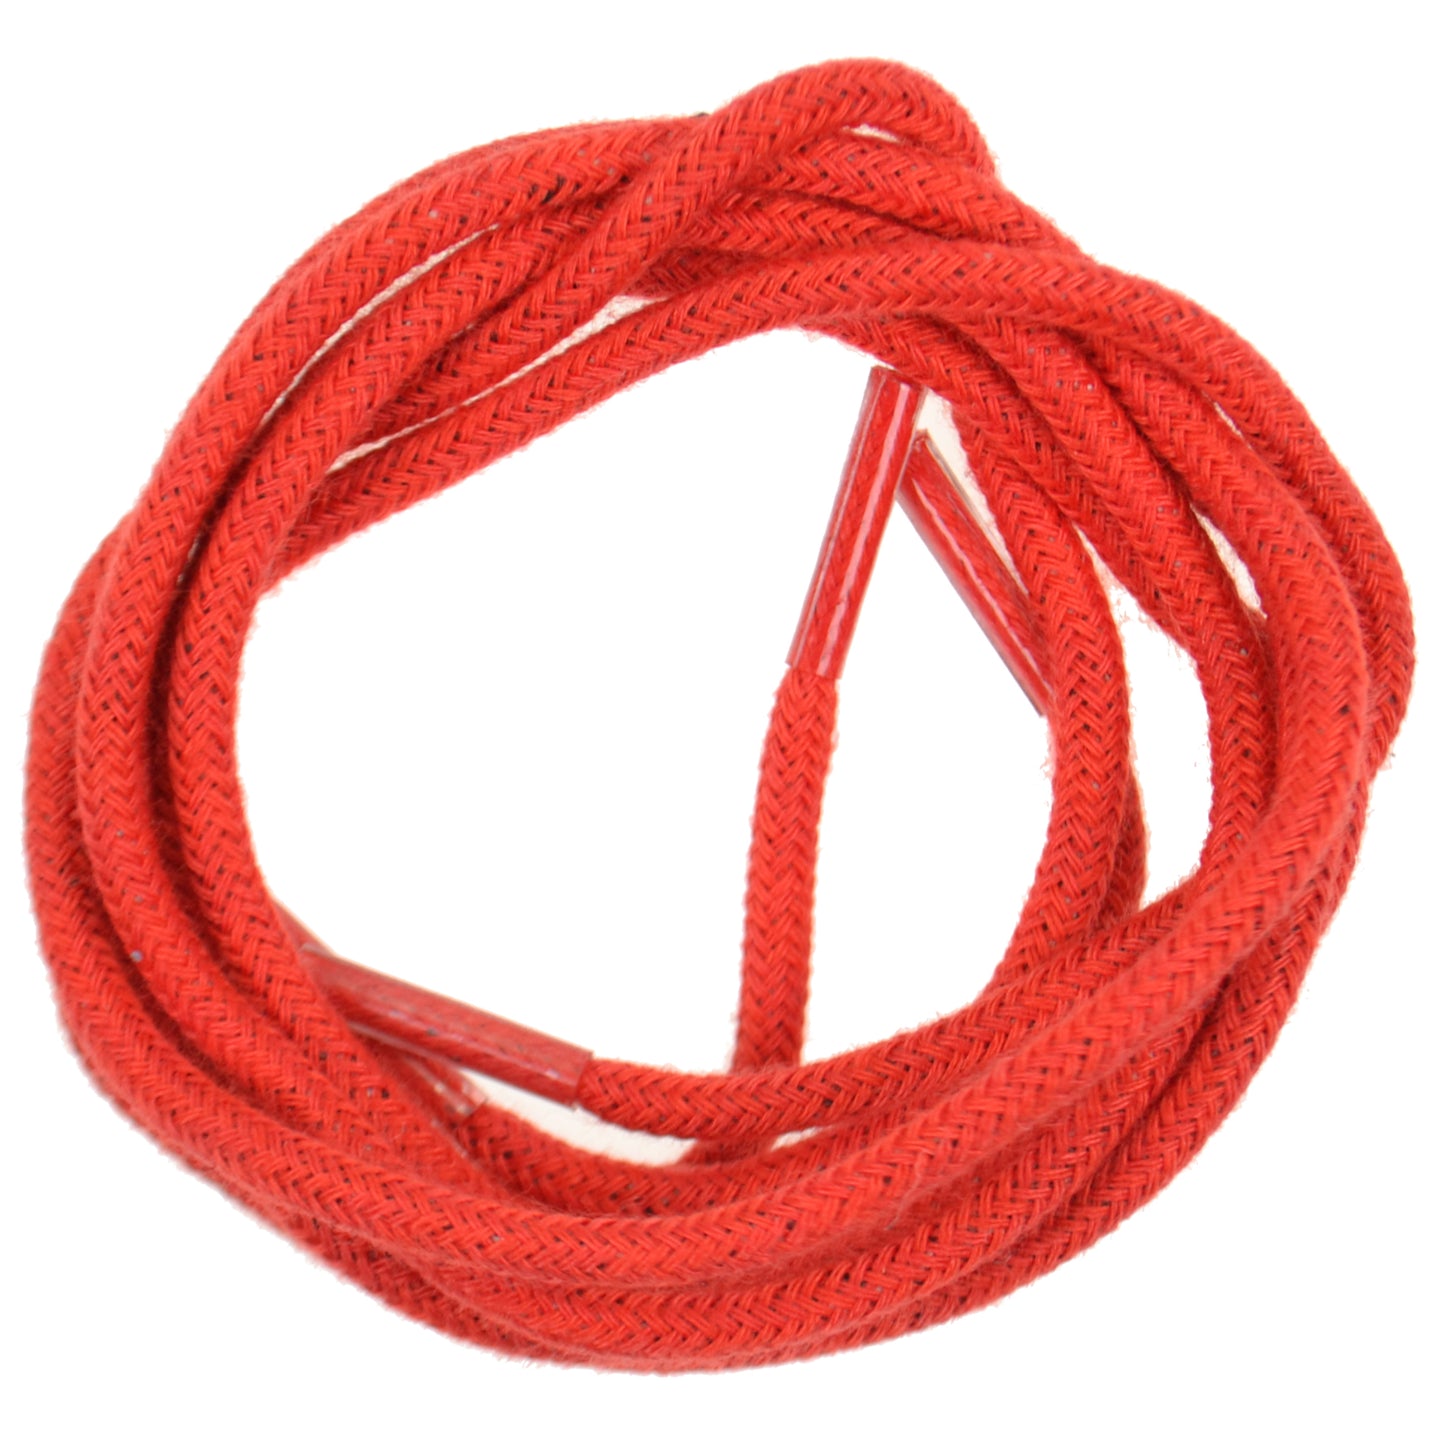 60cm Round Shoe Laces - Red